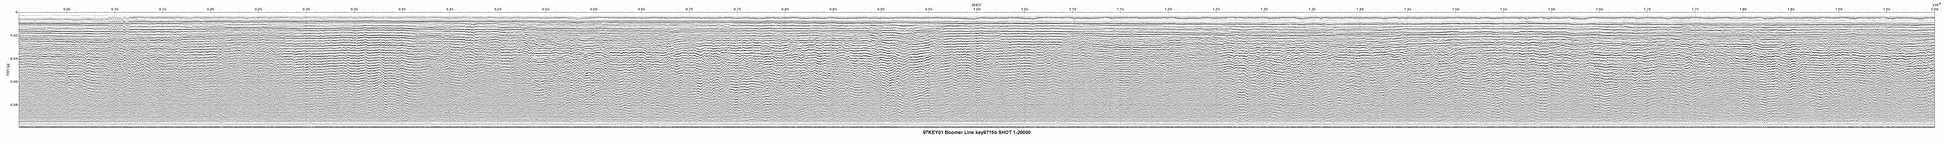 Thumbnail GIF image of the seismic trackline key9715b, with a hotlink to the more detailed, larger JPG image.